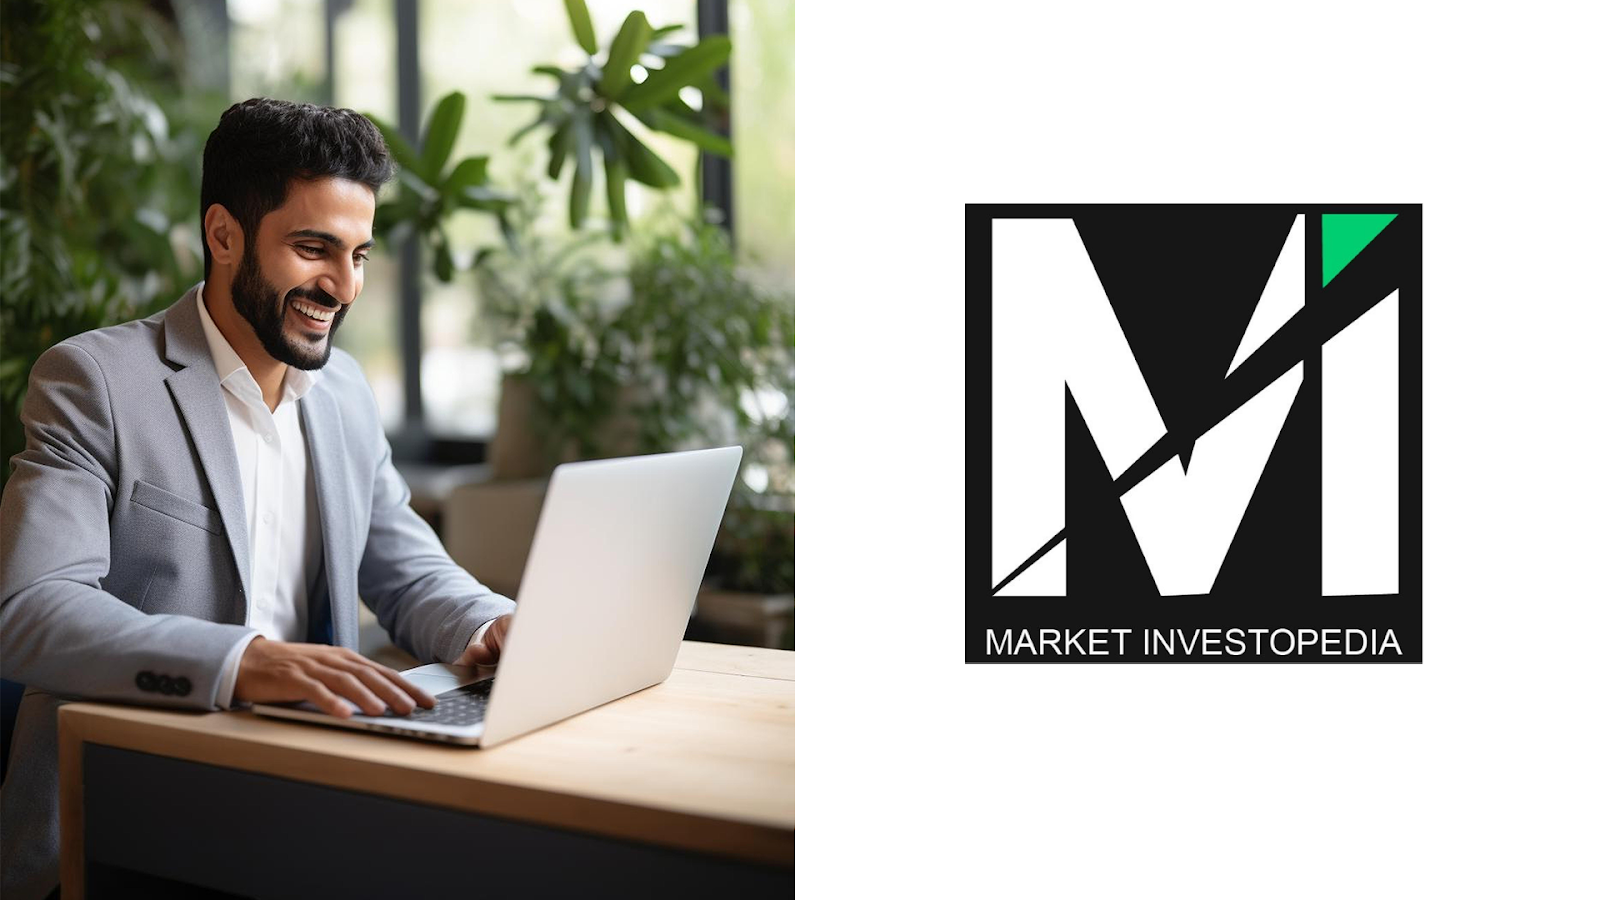 Market Investopedia Announces the Launch of its Exclusive Webinar Series for Traders